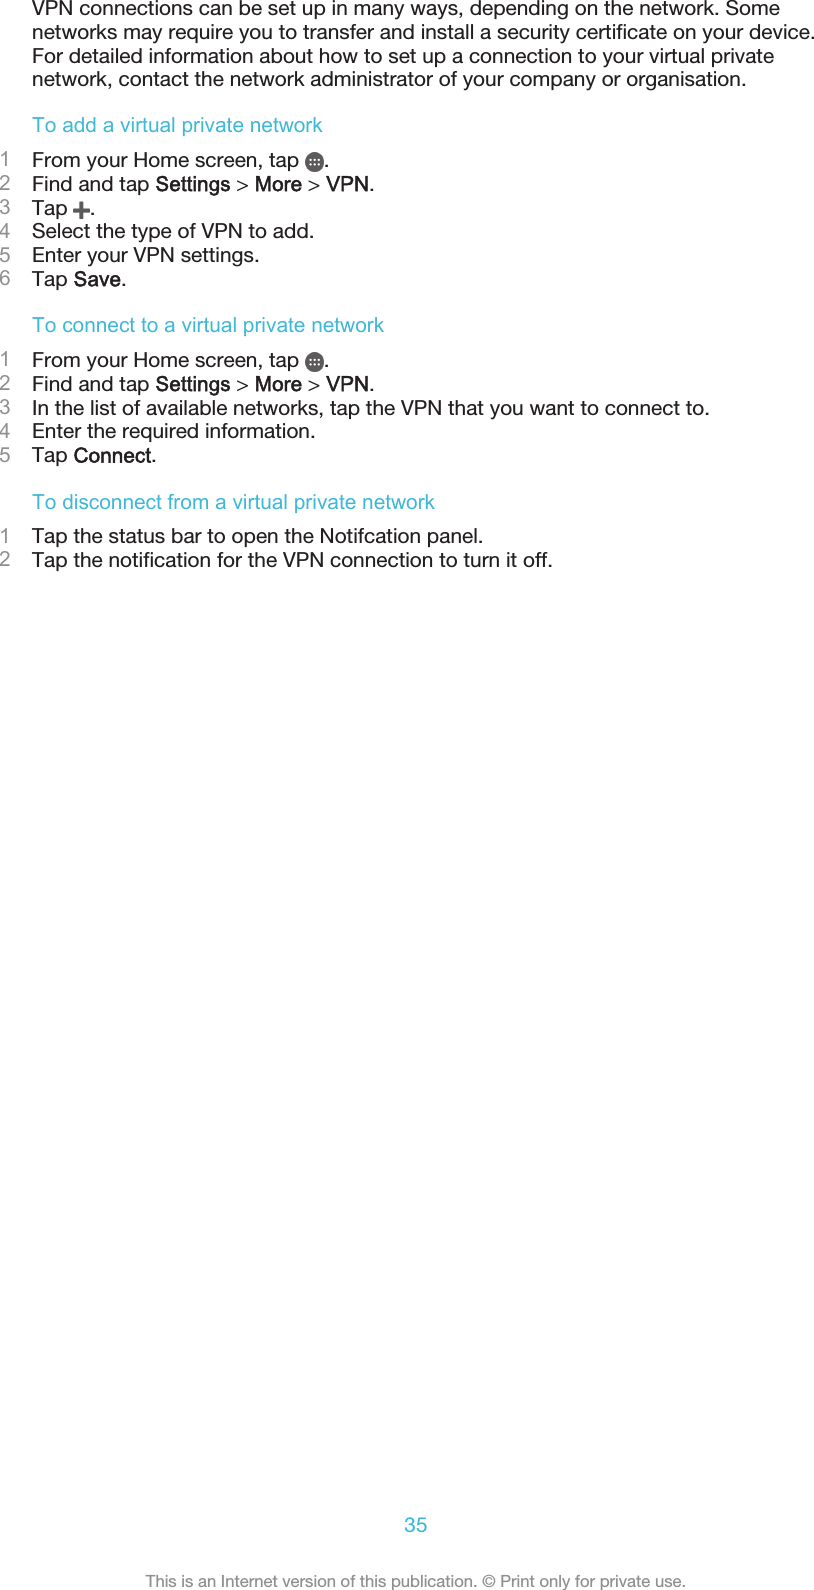 VPN connections can be set up in many ways, depending on the network. Somenetworks may require you to transfer and install a security certificate on your device.For detailed information about how to set up a connection to your virtual privatenetwork, contact the network administrator of your company or organisation.To add a virtual private network1From your Home screen, tap  .2Find and tap Settings &gt; More &gt; VPN.3Tap  .4Select the type of VPN to add.5Enter your VPN settings.6Tap Save.To connect to a virtual private network1From your Home screen, tap  .2Find and tap Settings &gt; More &gt; VPN.3In the list of available networks, tap the VPN that you want to connect to.4Enter the required information.5Tap Connect.To disconnect from a virtual private network1Tap the status bar to open the Notifcation panel.2Tap the notification for the VPN connection to turn it off.35This is an Internet version of this publication. © Print only for private use.